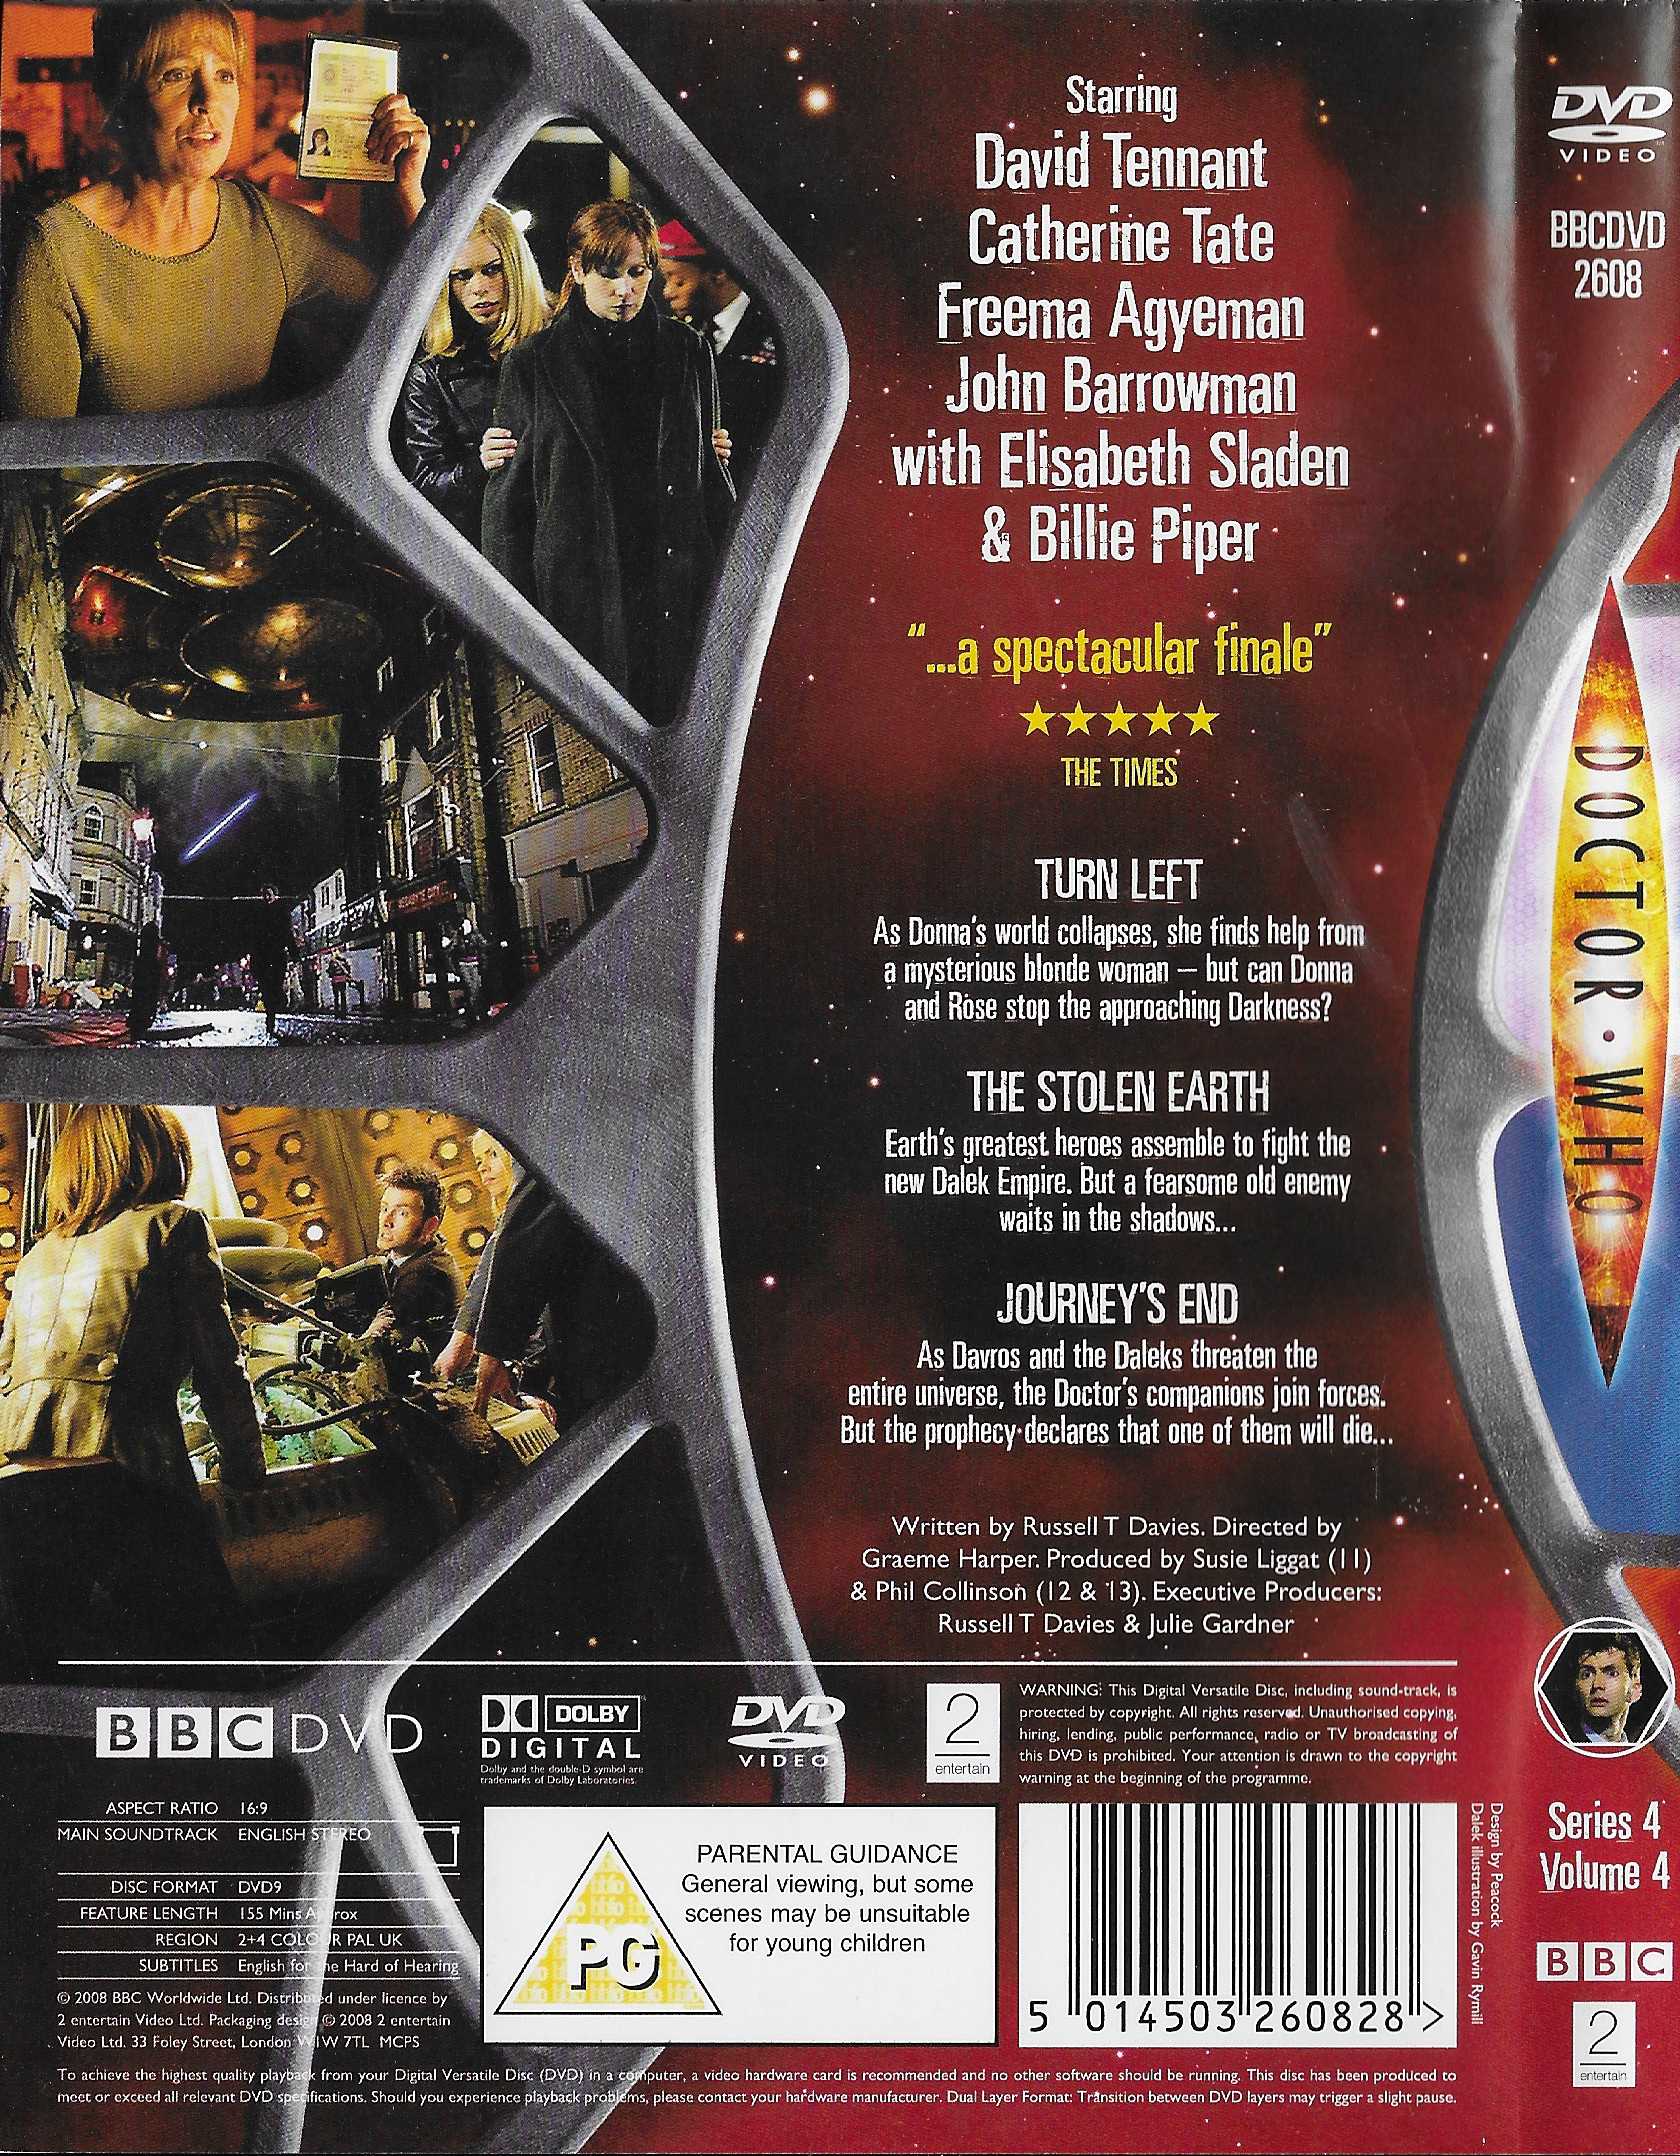 Picture of BBCDVD 2608 Doctor Who - Series 4, volume 4 by artist Russell T Davies from the BBC records and Tapes library